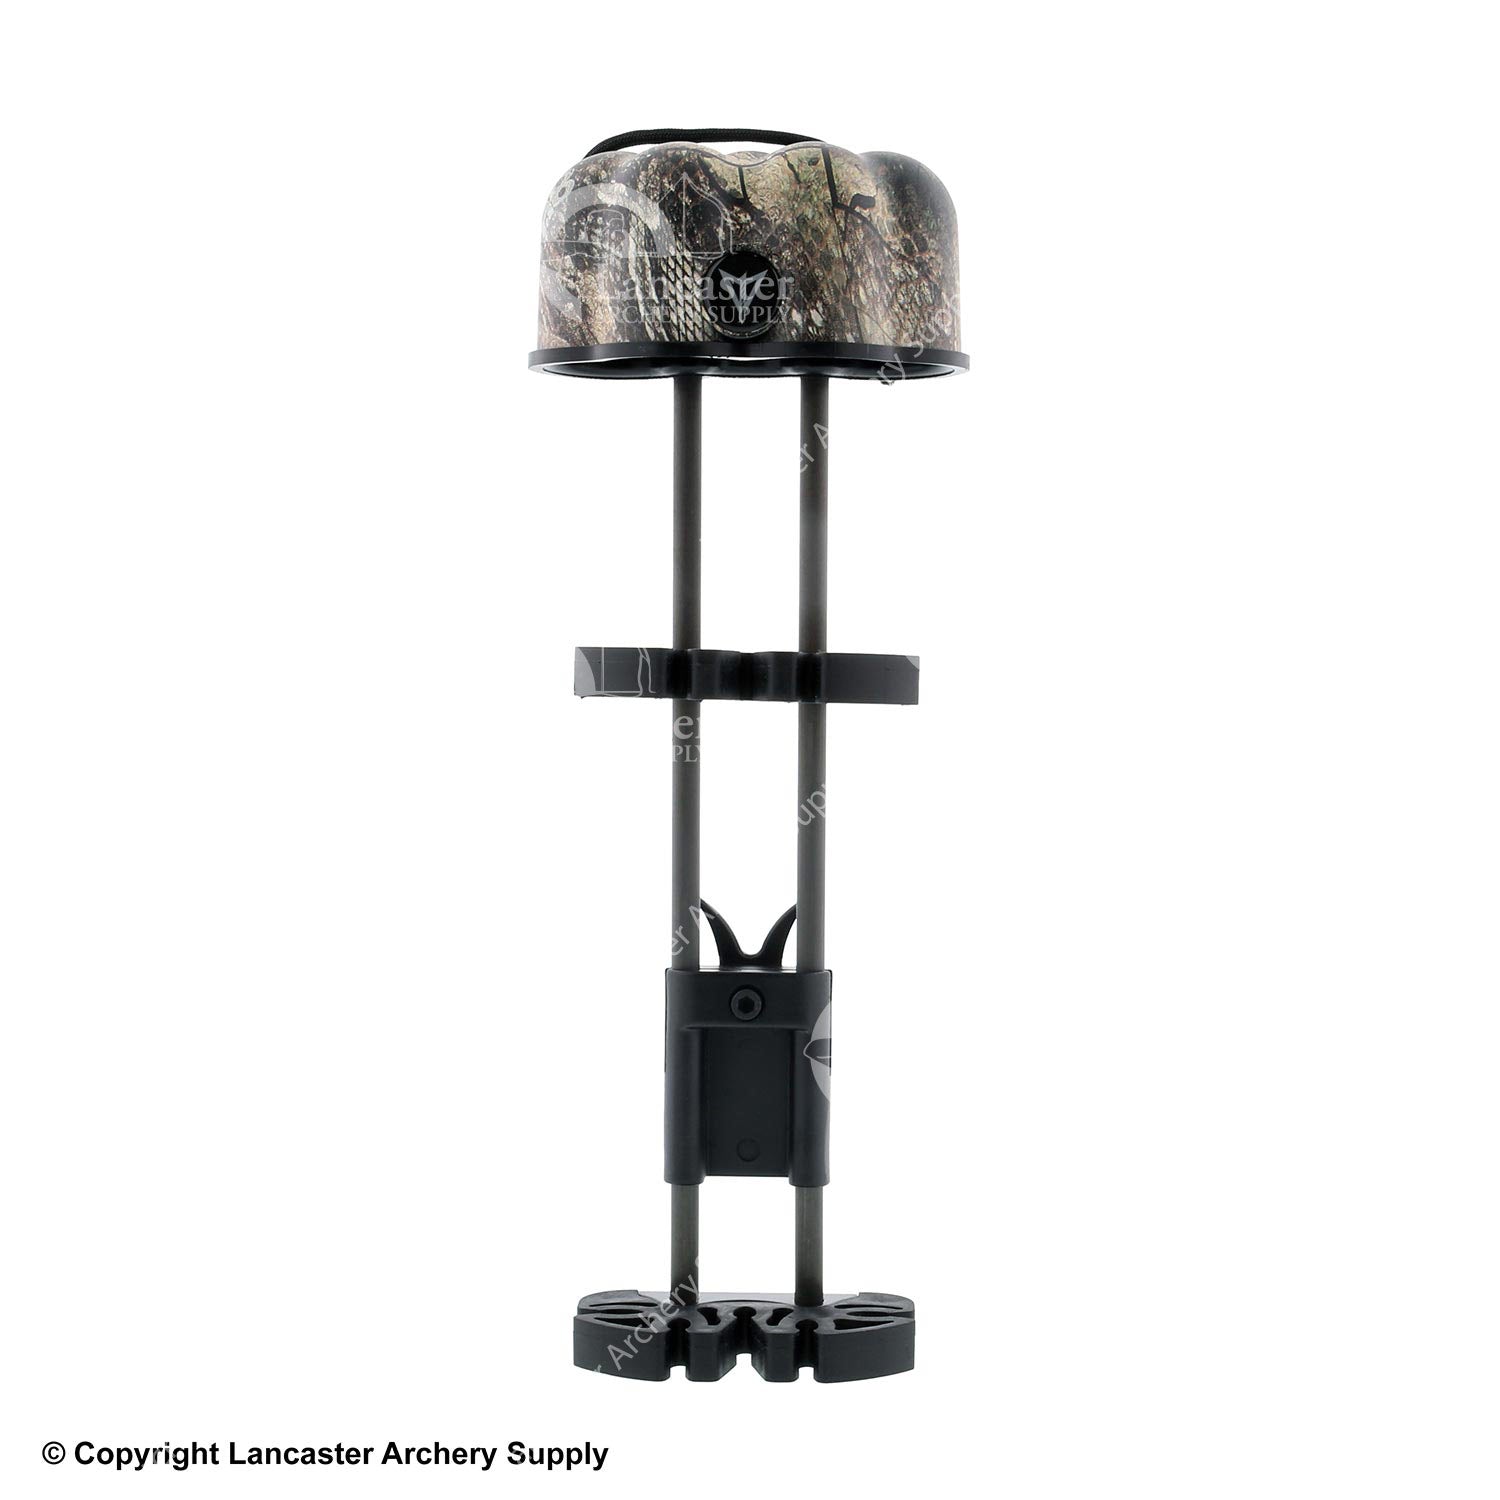 A camo bow quiver that can attach to a bow. It has slots to hold arrows and a small broadhead shield.